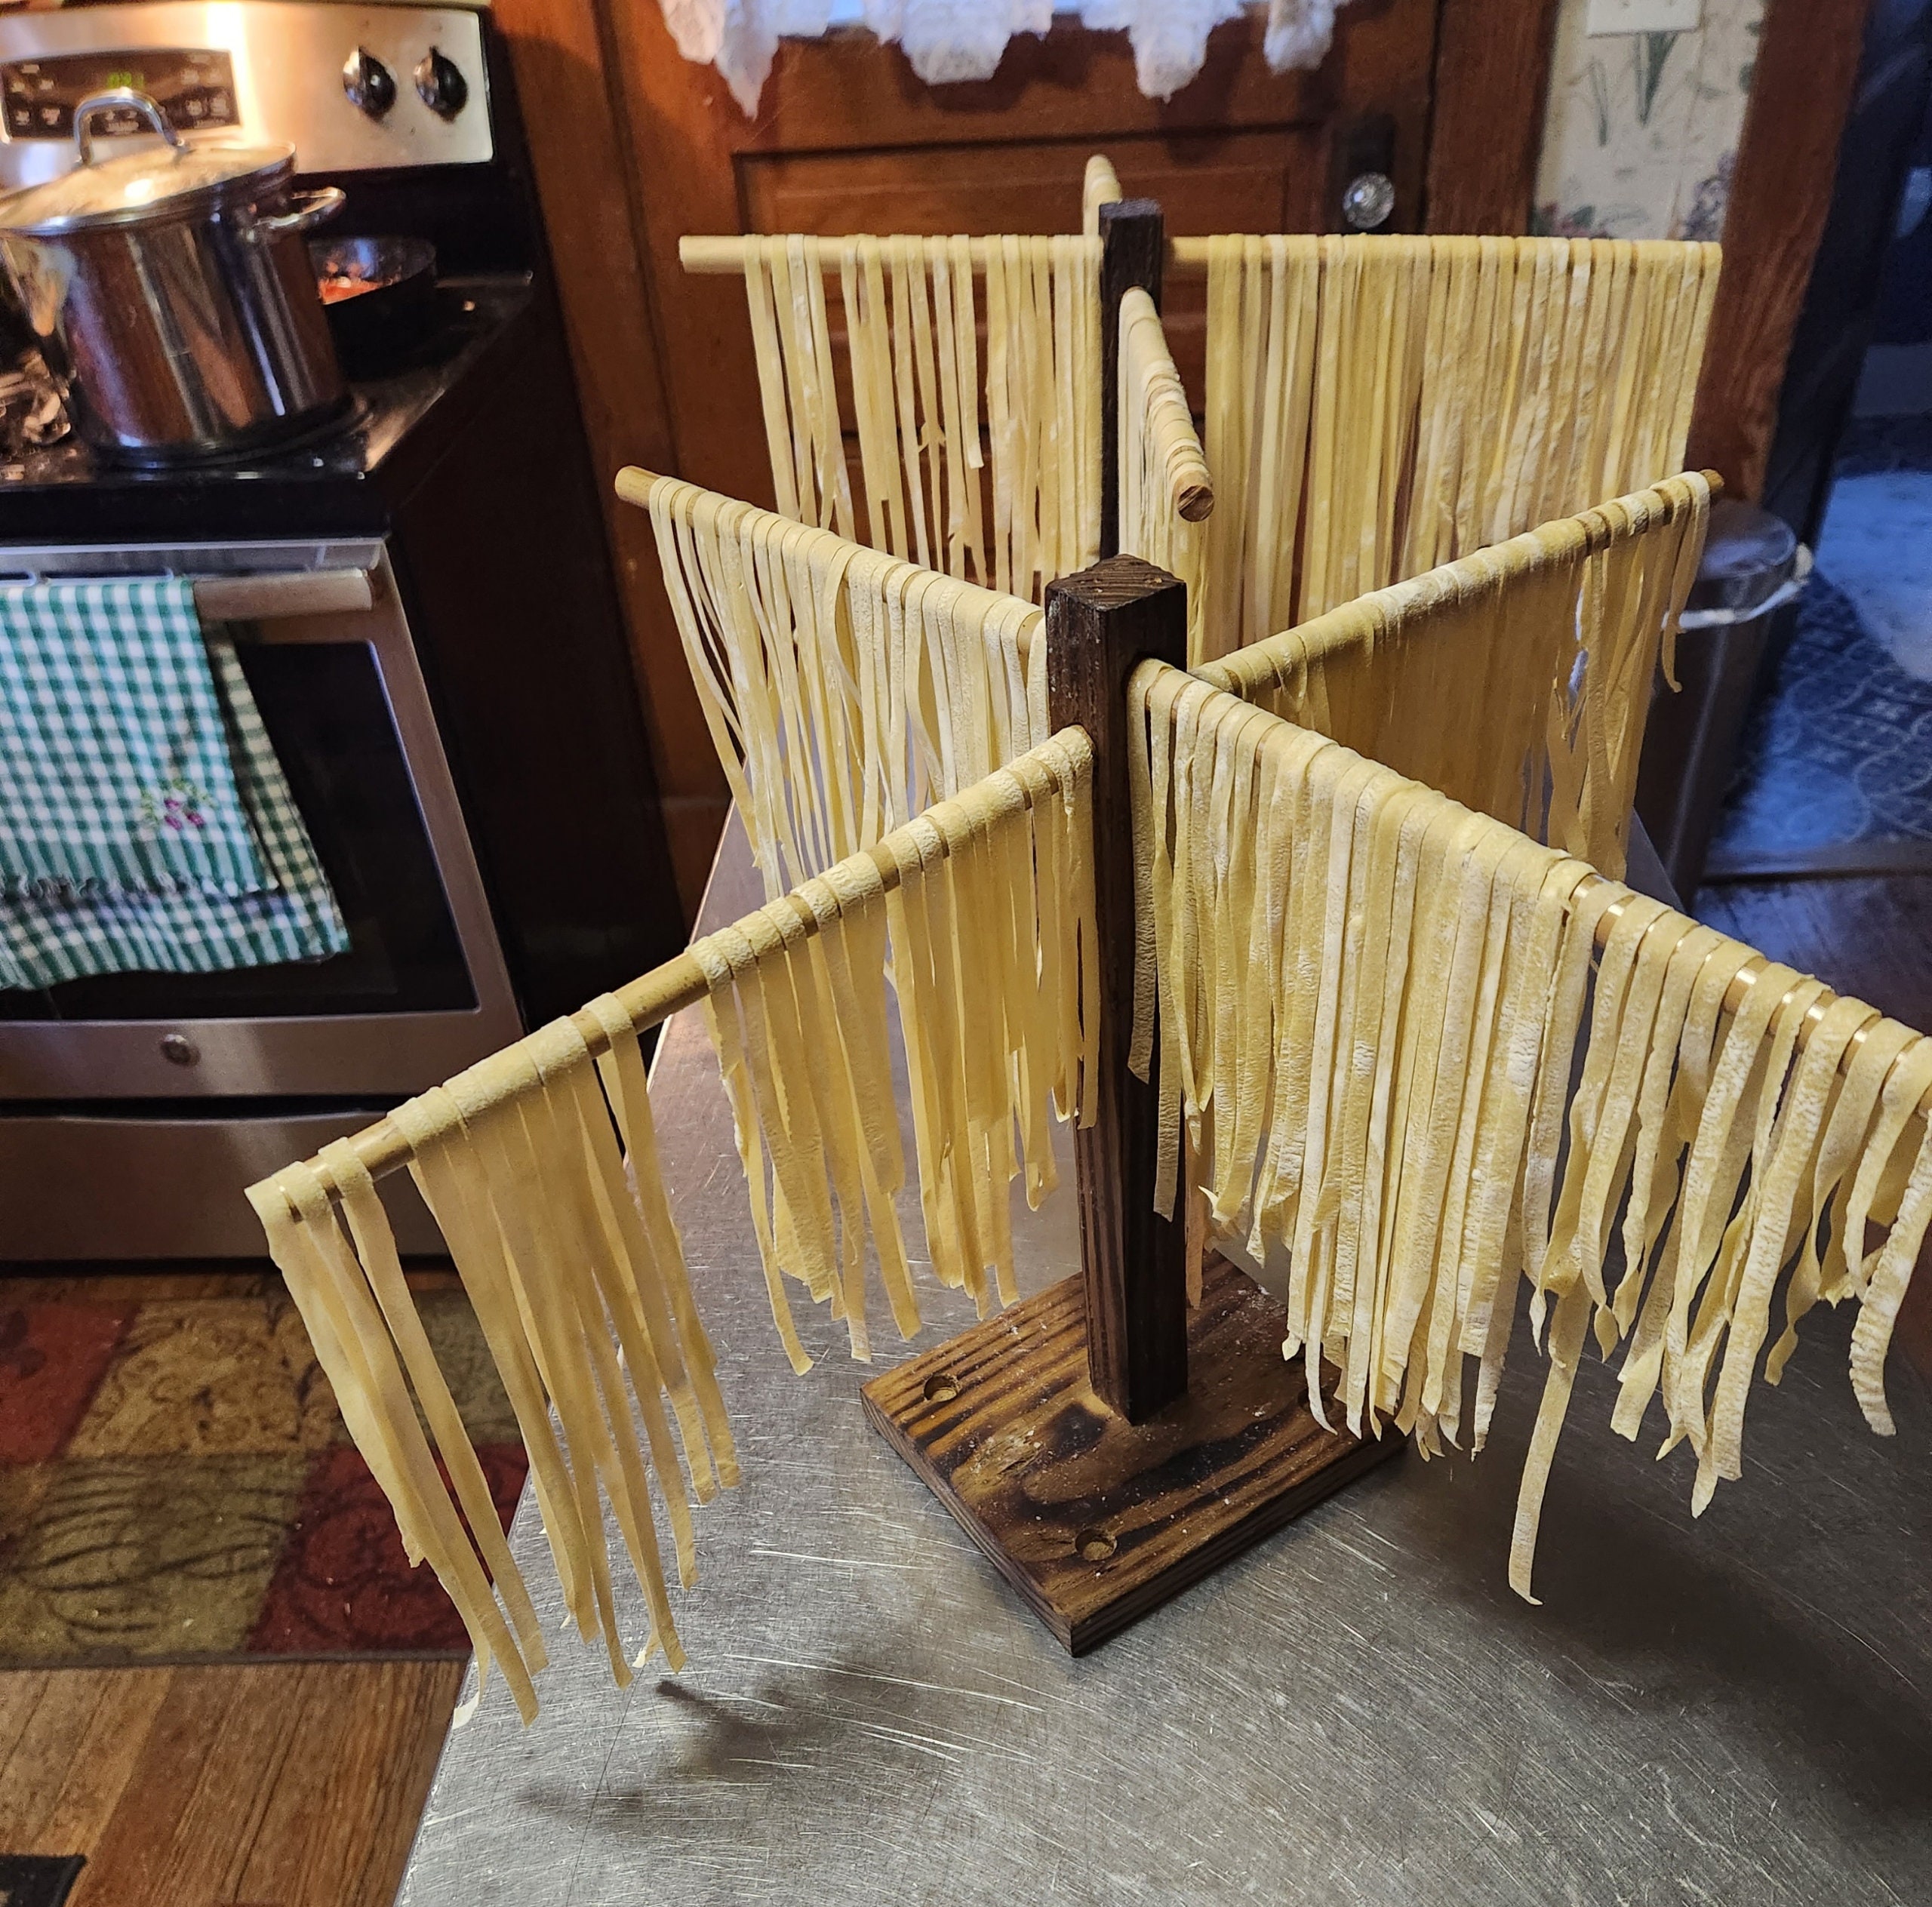 Cousin Lucia's Collapsible Pasta Drying Rack by Fante's - Austin